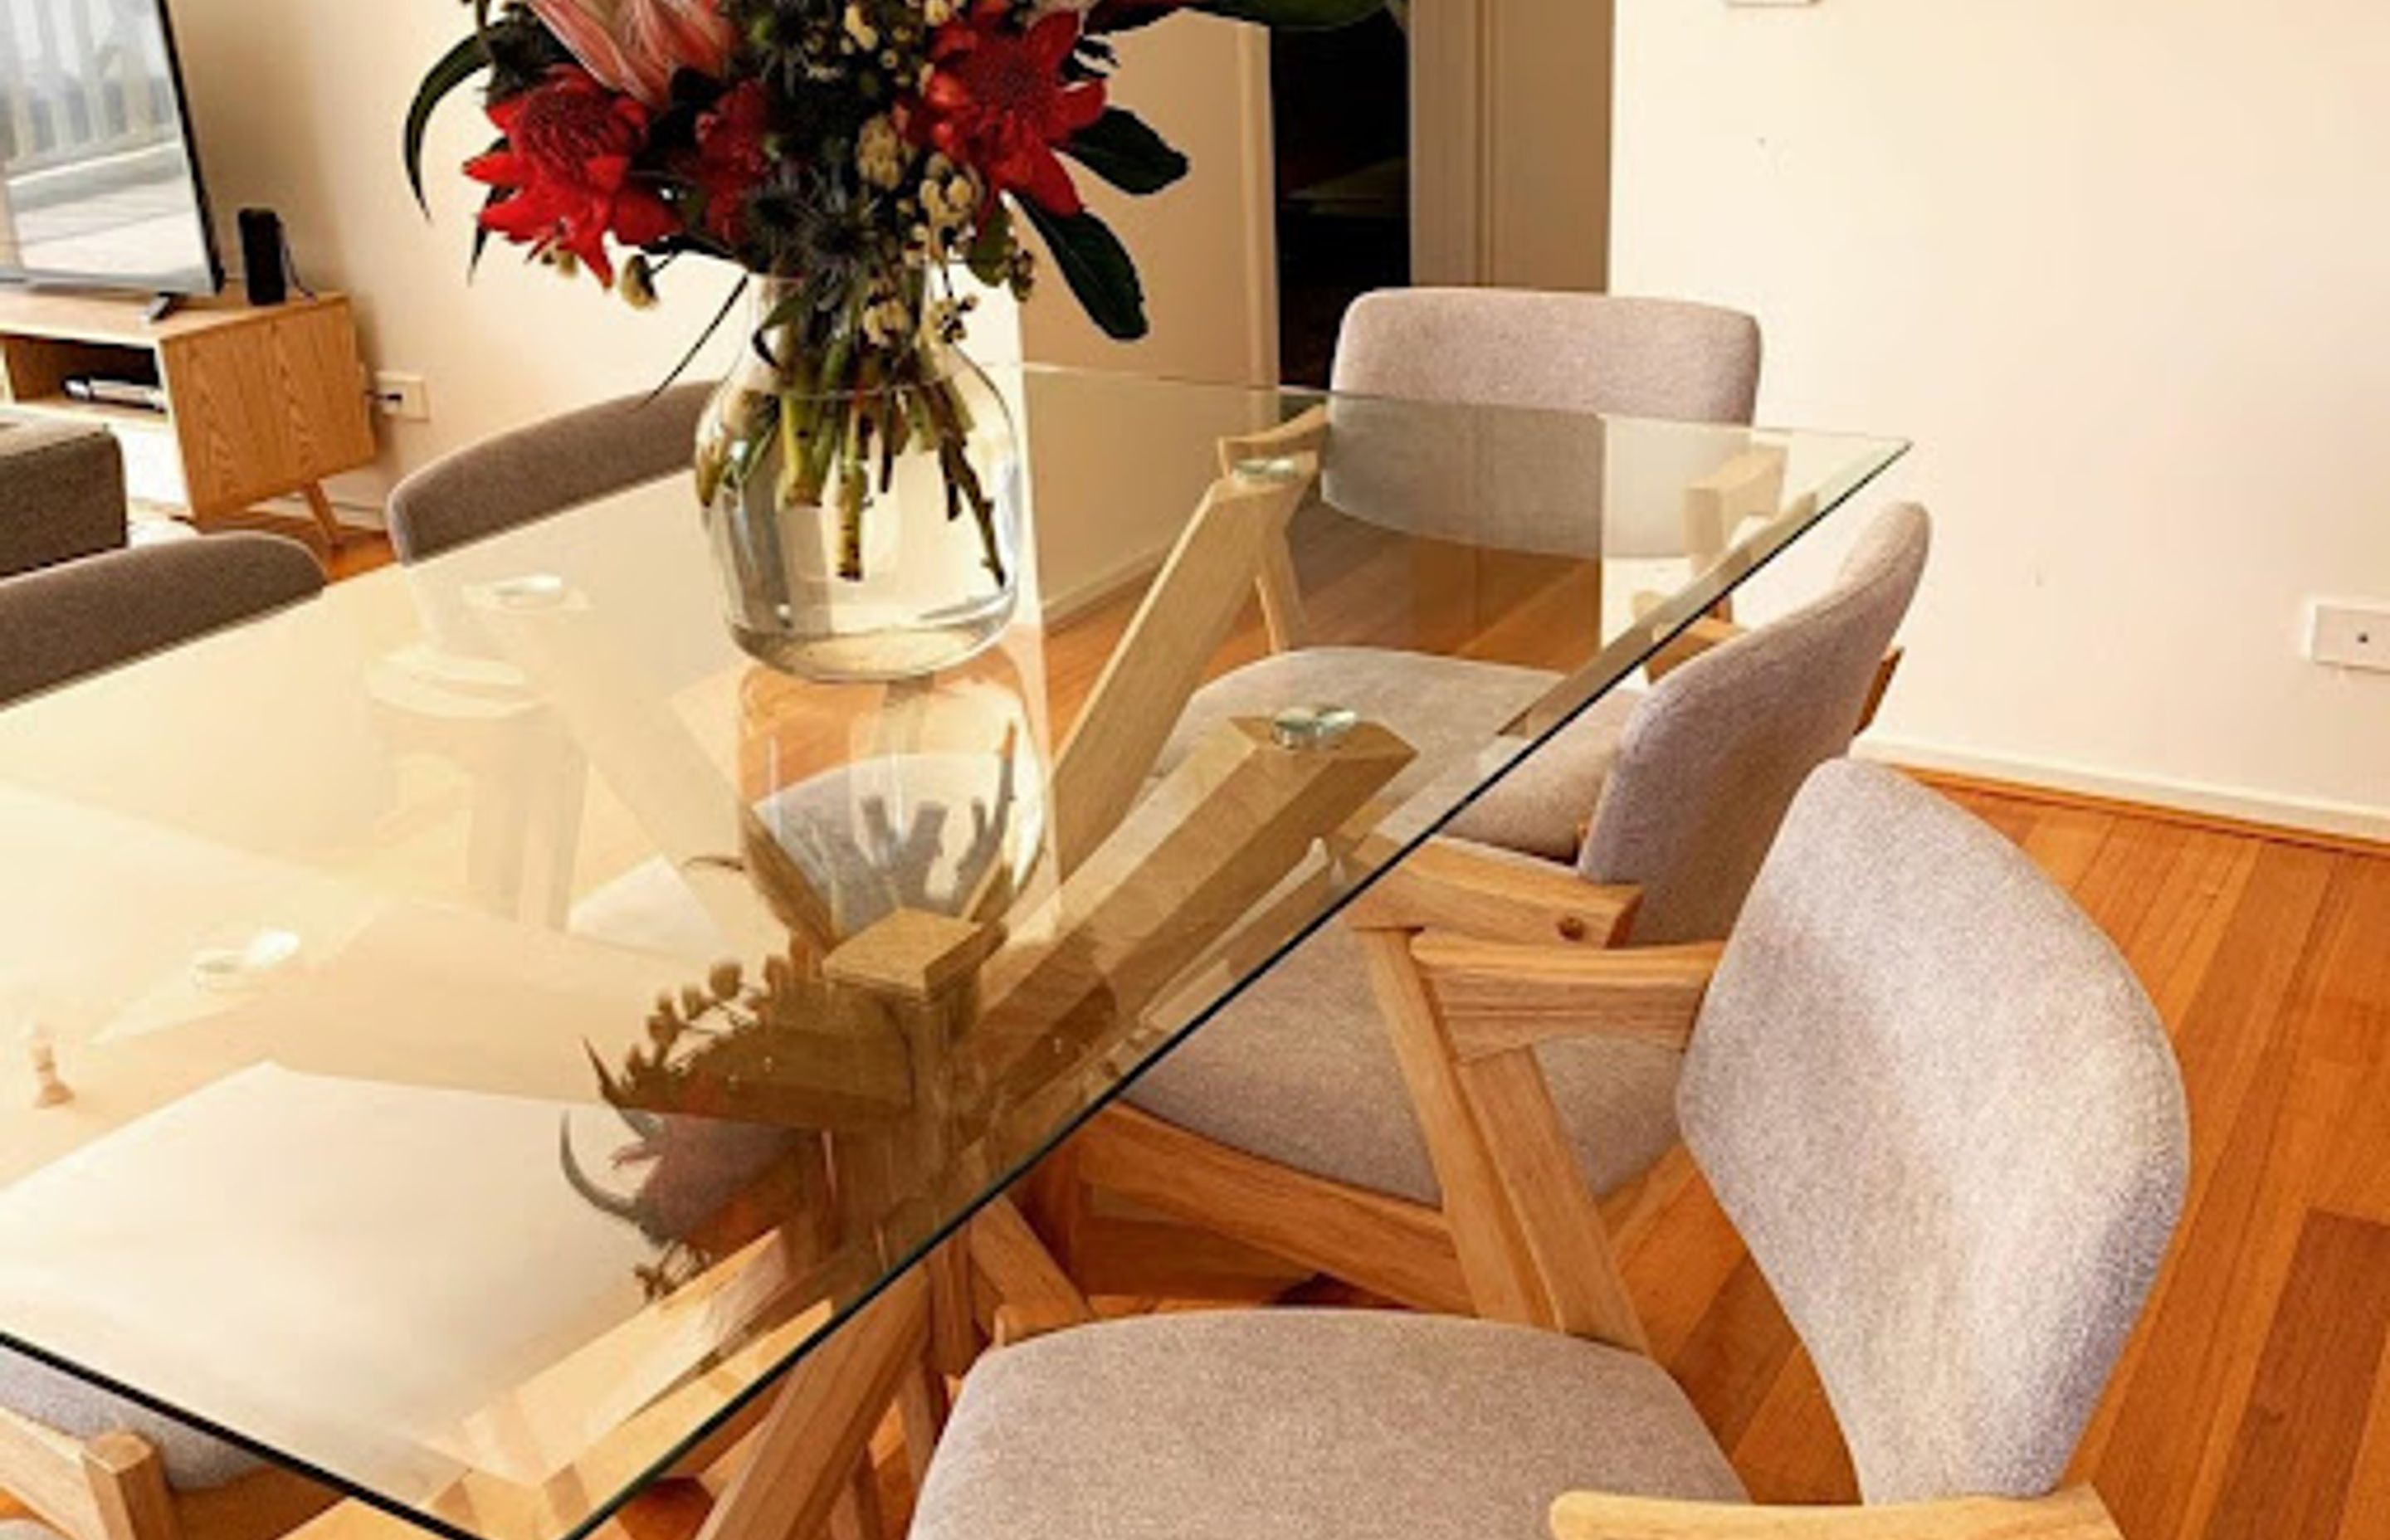 Dining Chair Designs: How to Pair with a Dining Table